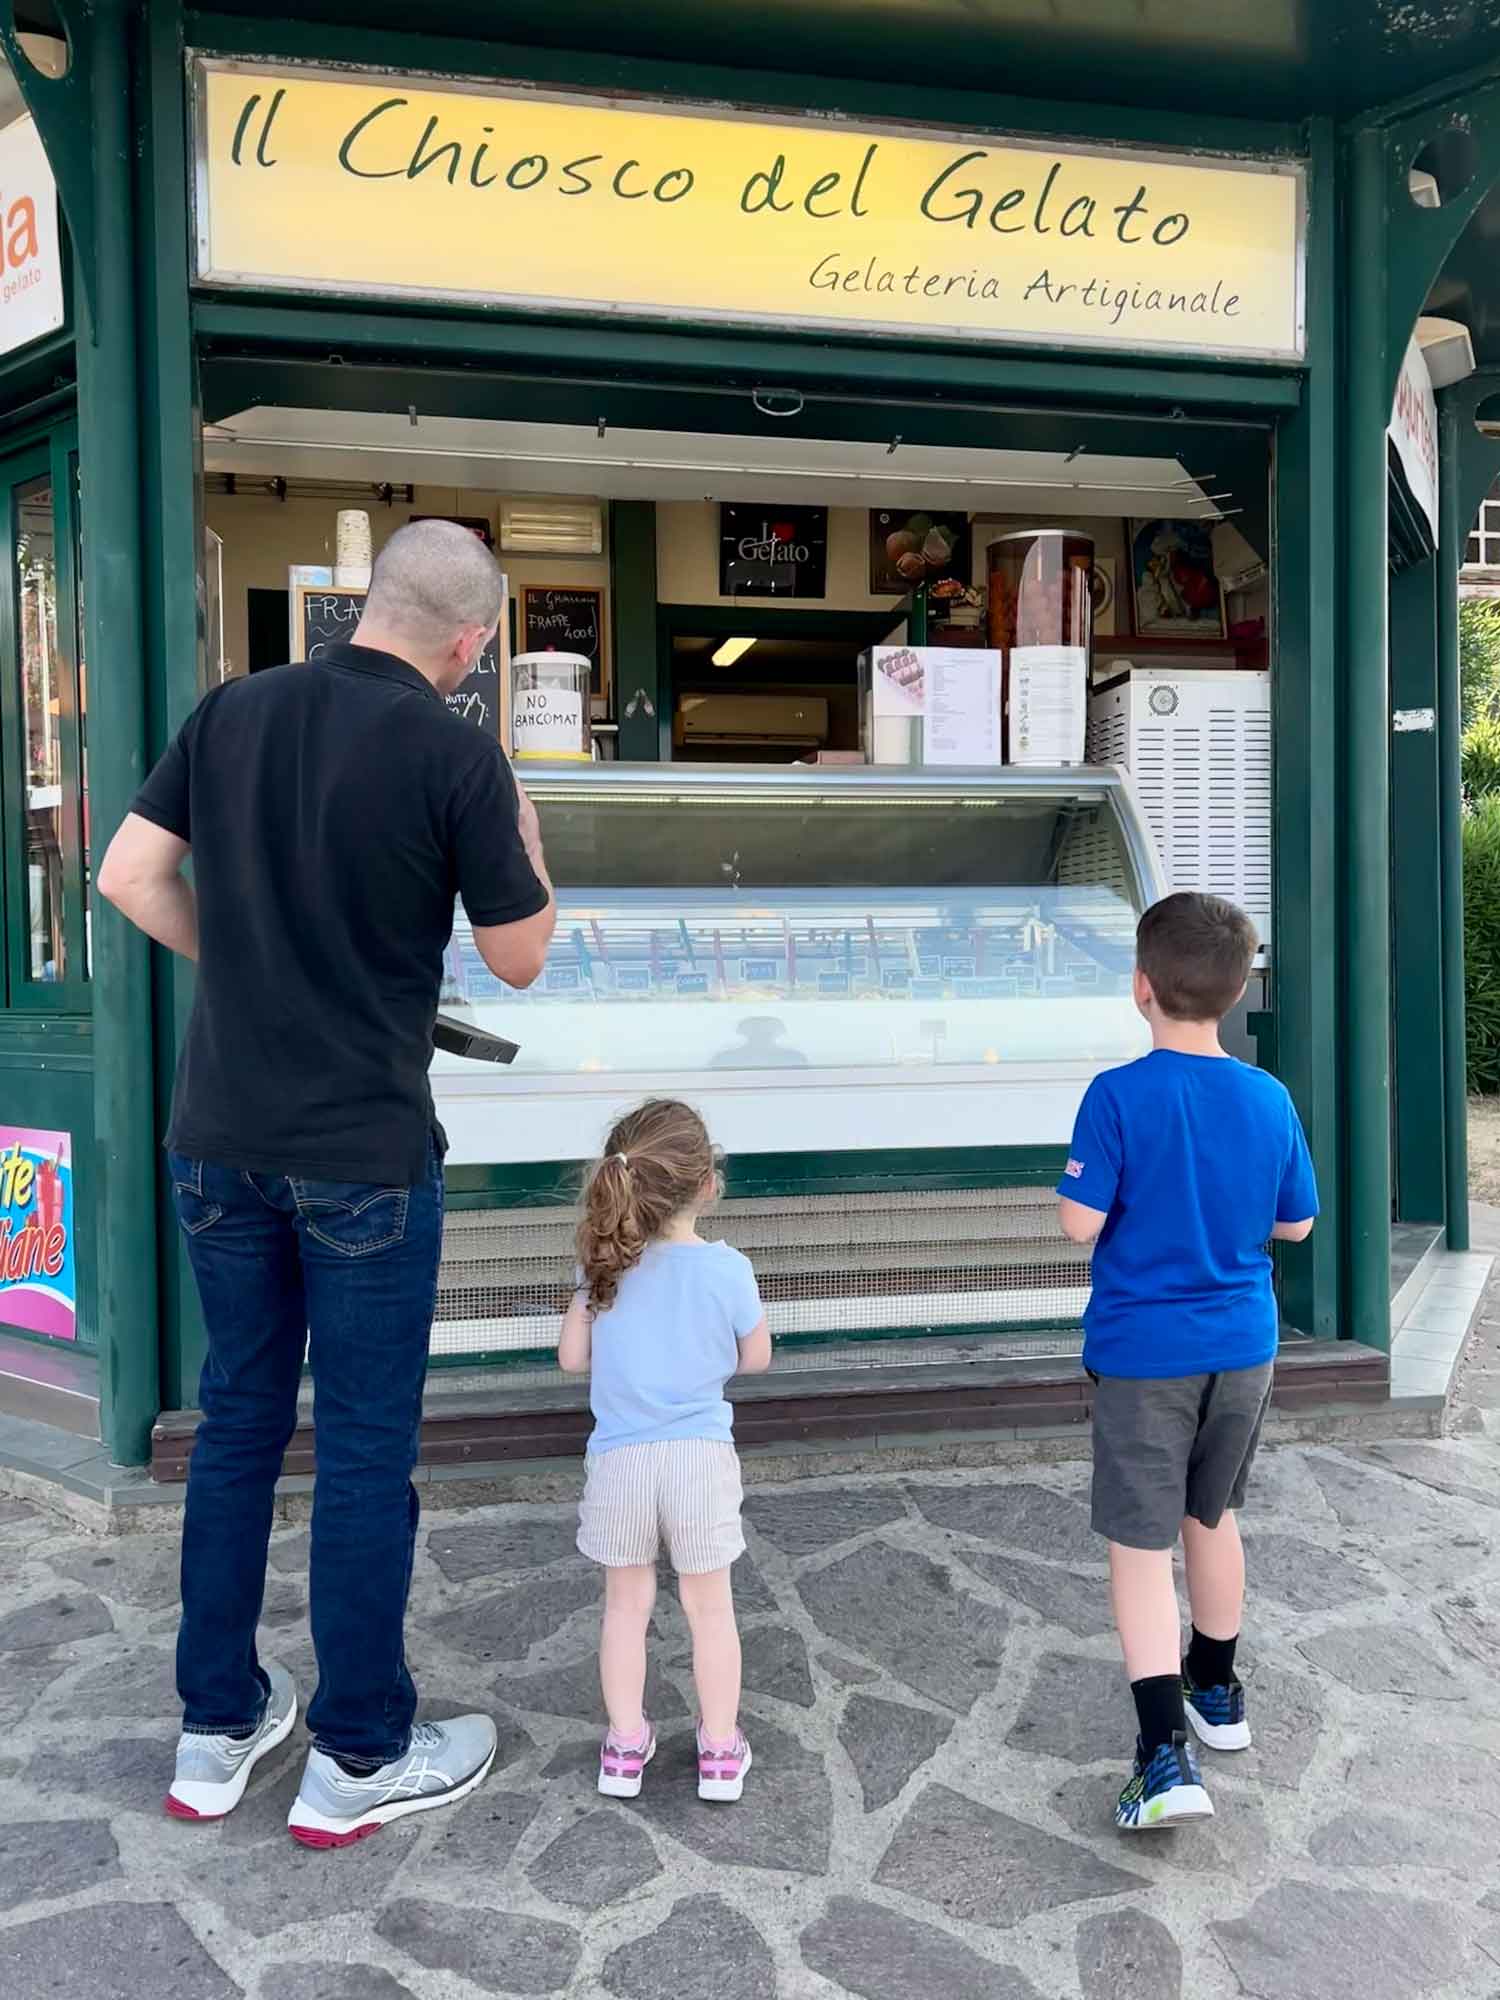 Dad and kids waiting at ice cream kiosk